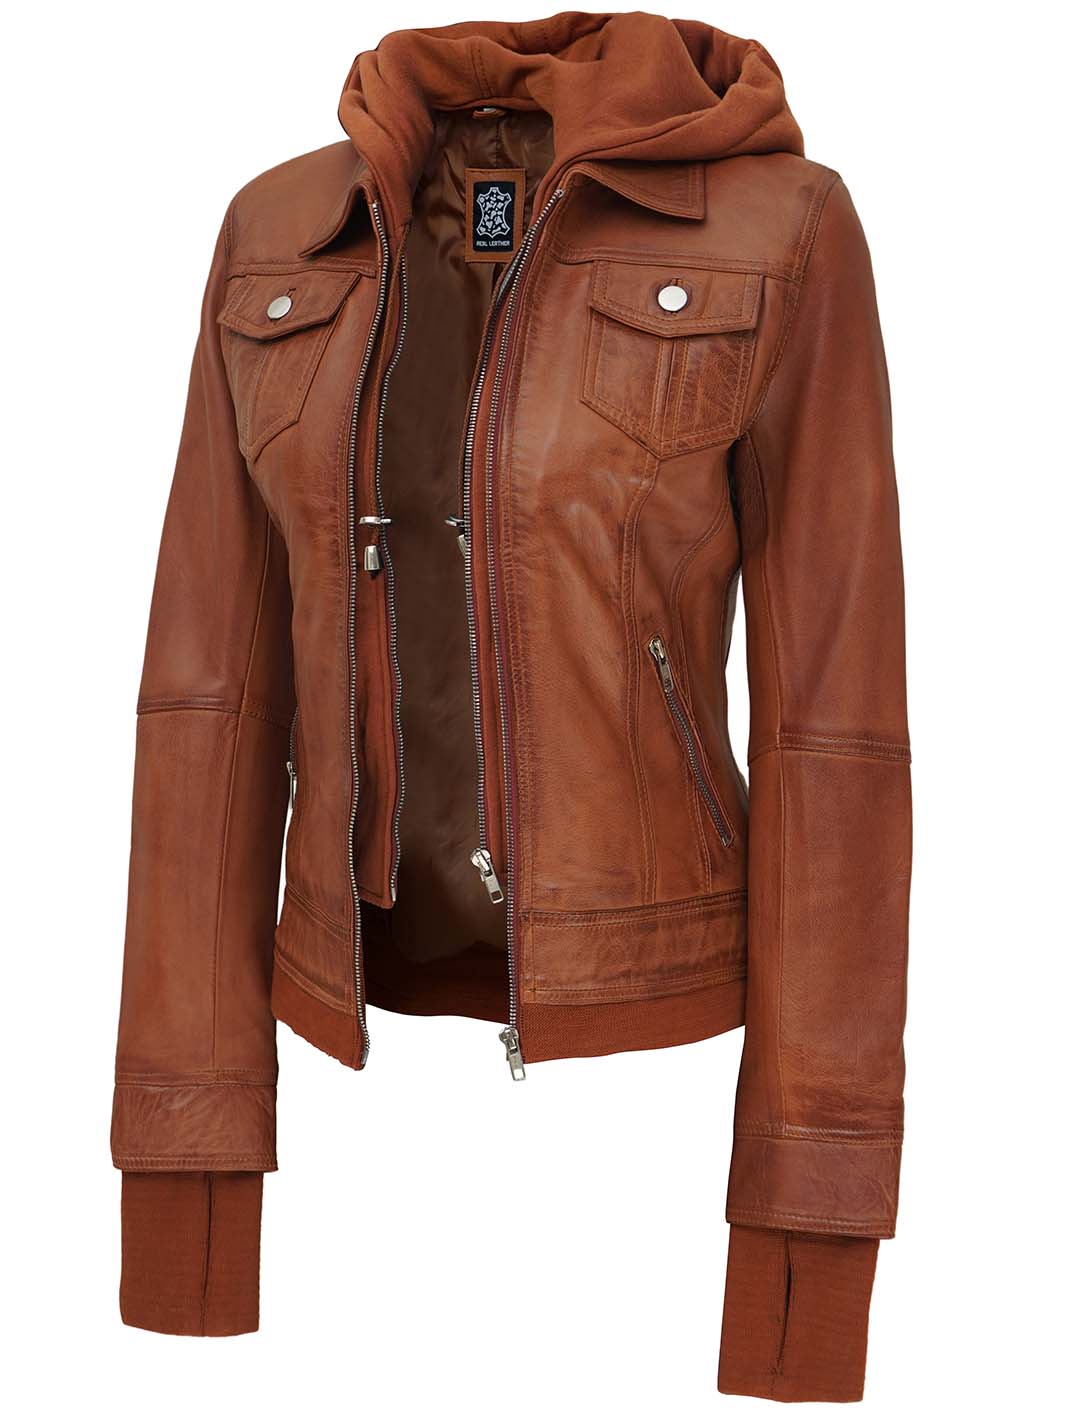 TraTan Wax Bomber Leather Jacket With Hood For Women